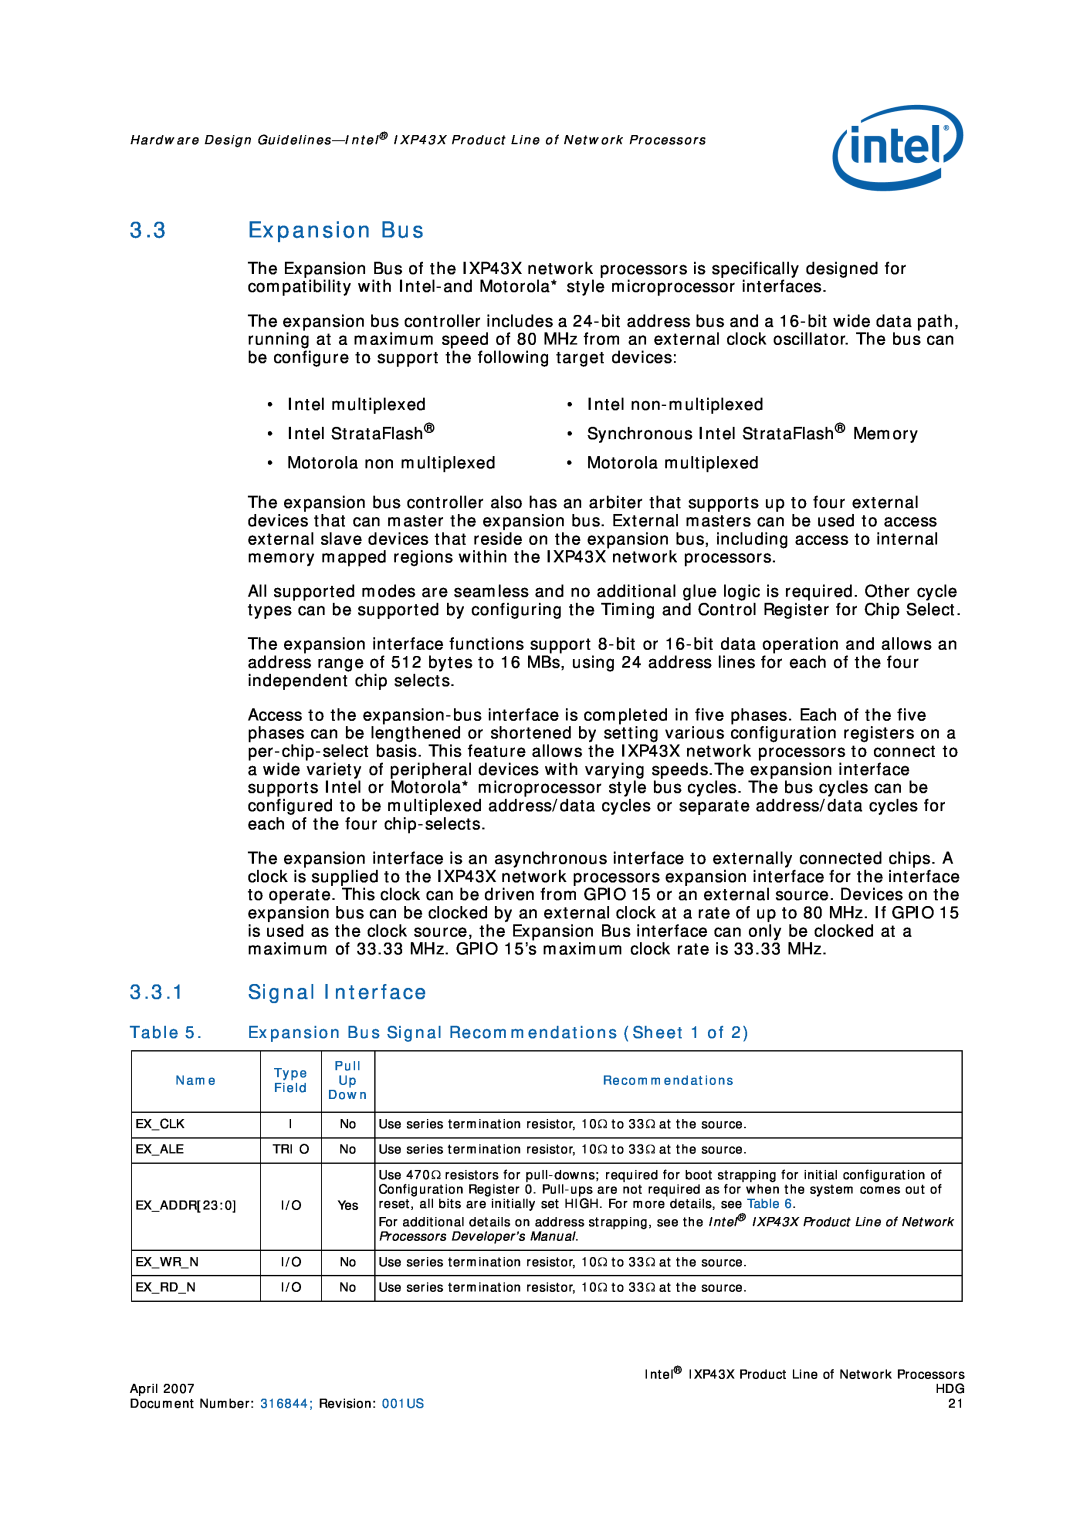 Intel IXP43X manual Signal Interface, Expansion Bus Signal Recommendations Sheet 1 of 